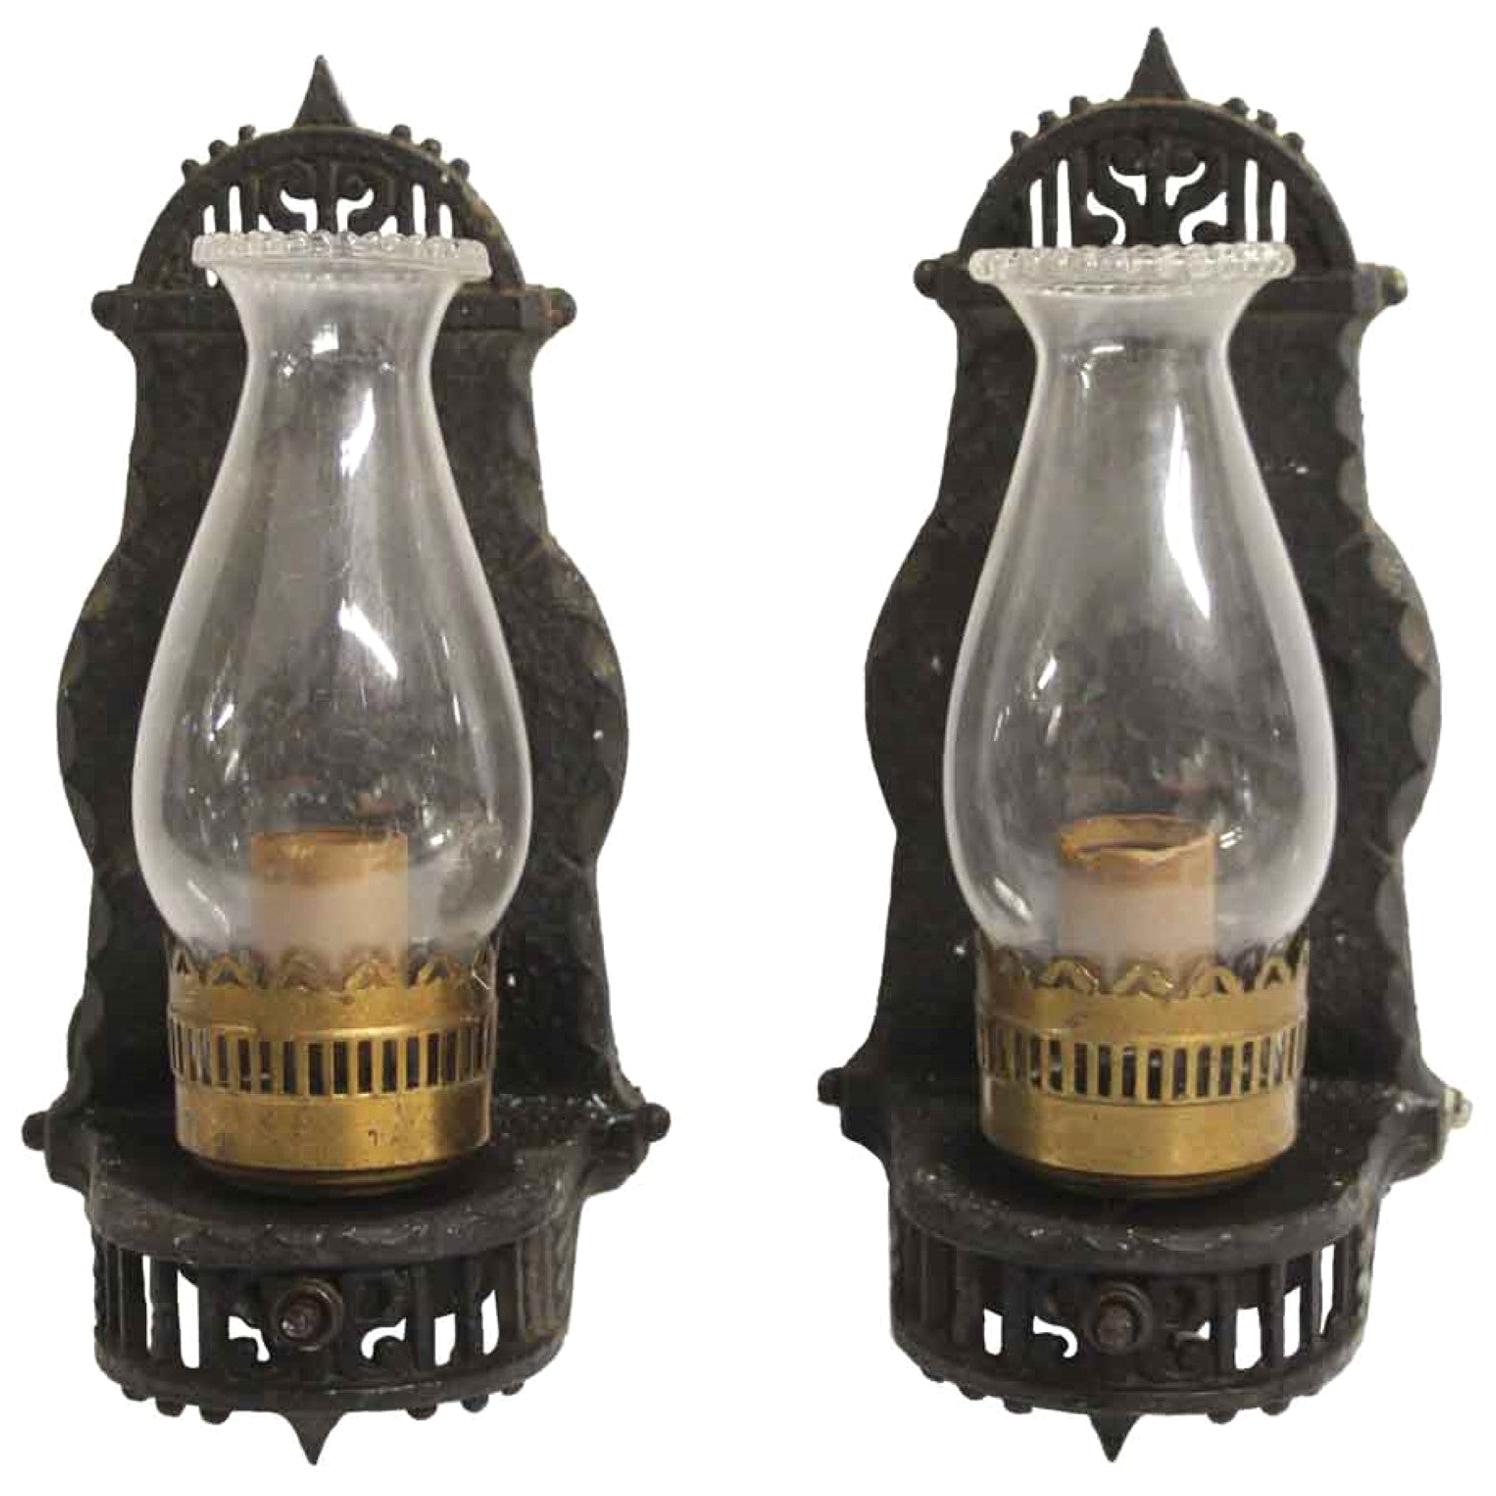 1910s Pair of Arts & Crafts Wall Sconces Cast Iron with Glass Chimneys